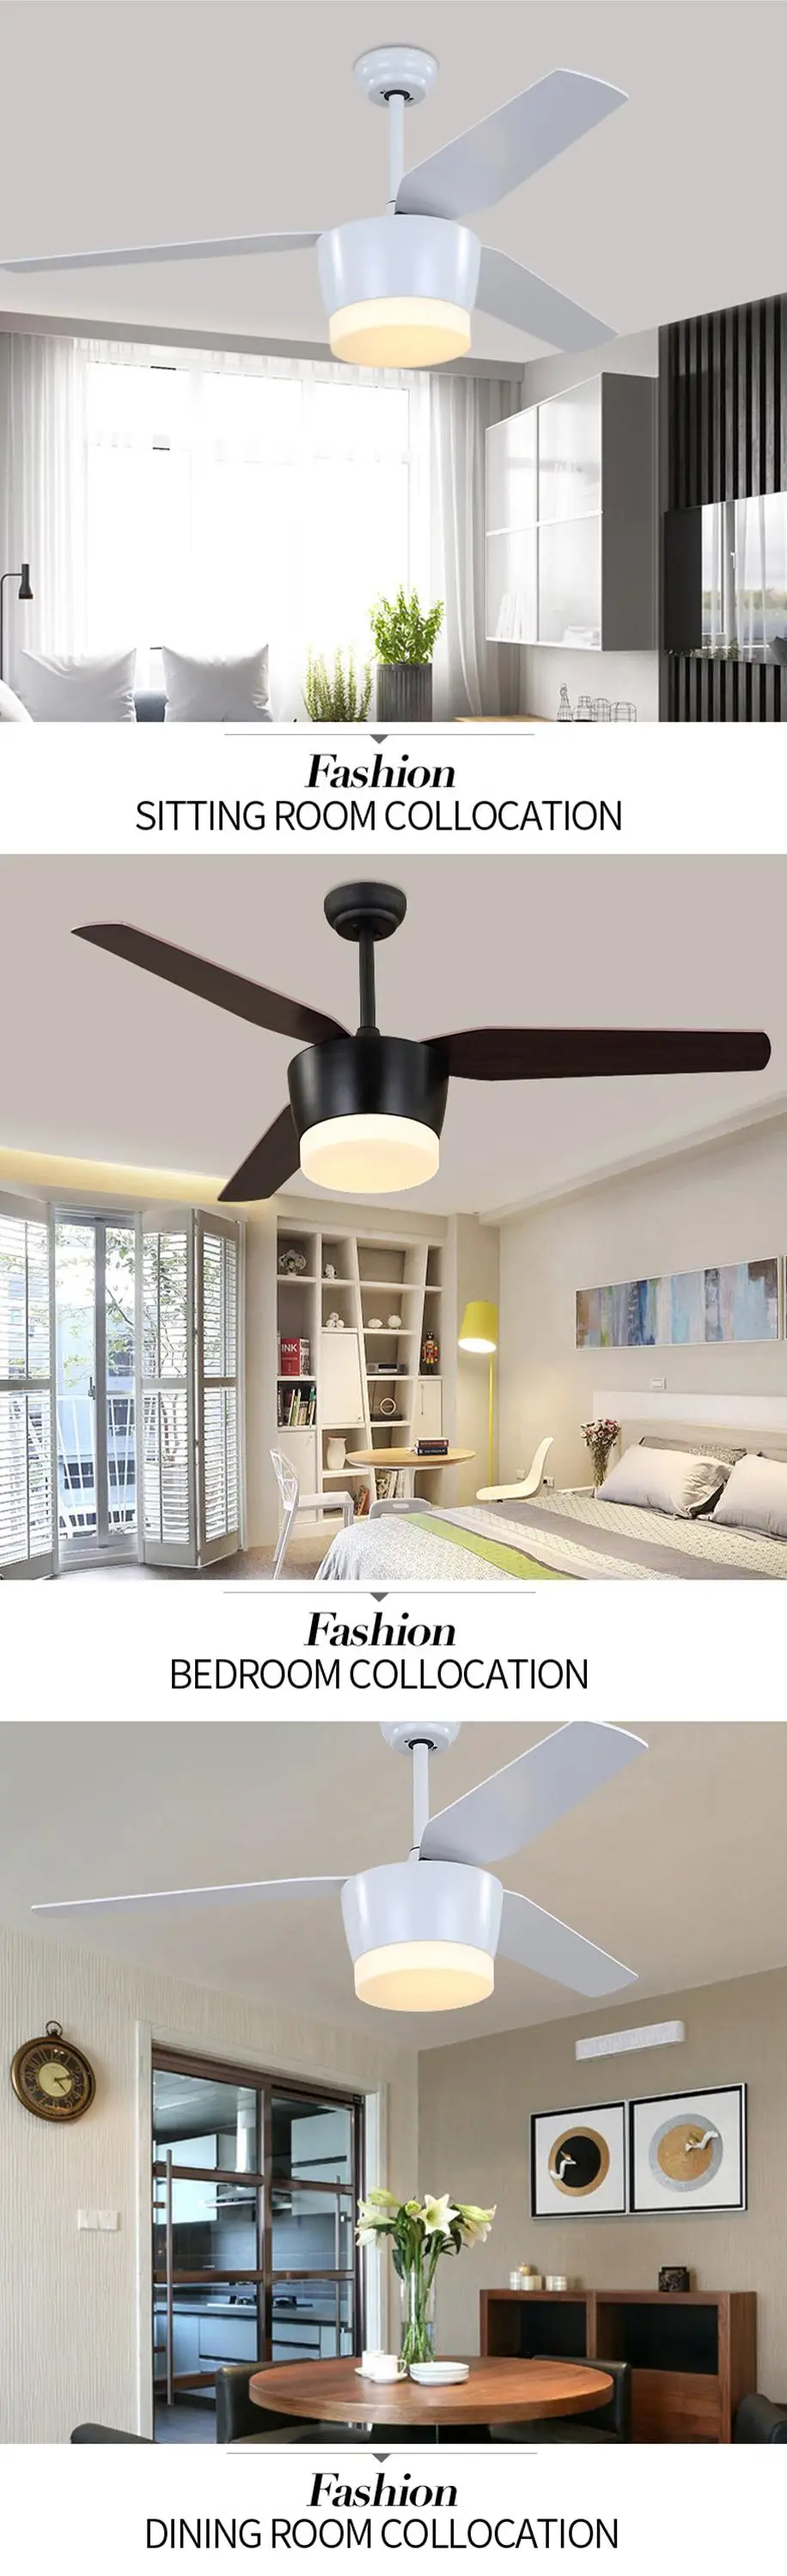 Factory Direct Price Sale 52 F3141 Bk Antique Fancy Ceiling Fan Light Buy Antique Fancy Ceiling Fan Light Cheap Ceiling Fan With Light Home